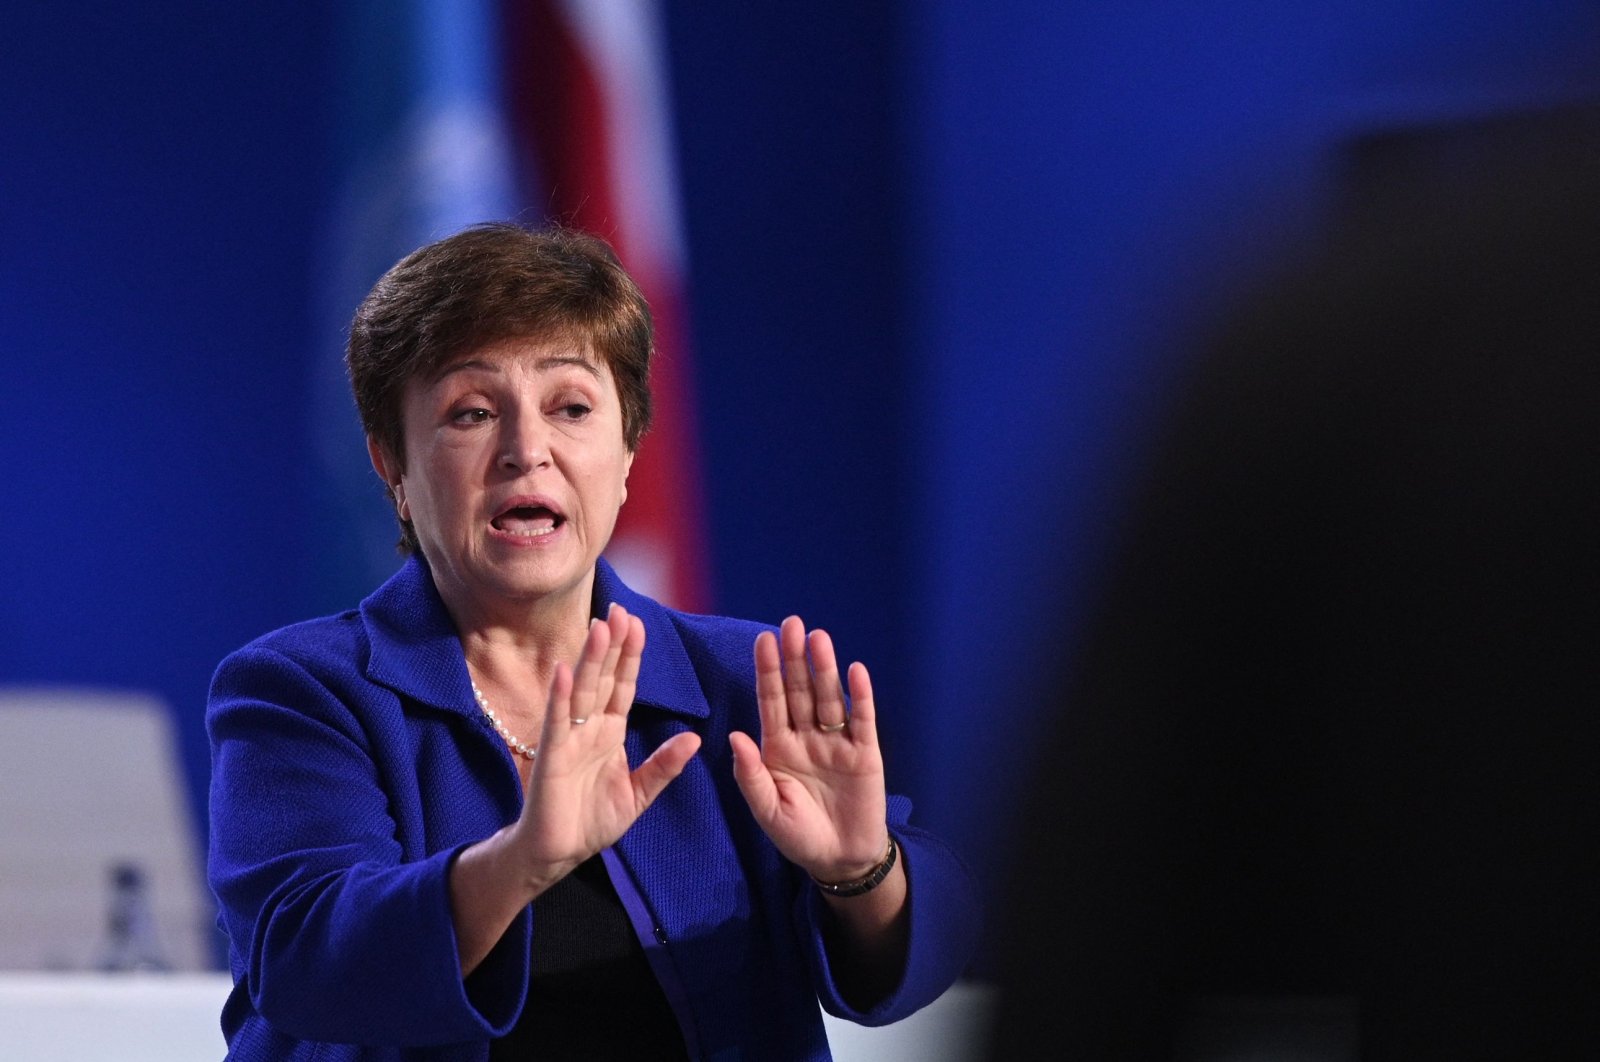 IMF managing director Kristalina Georgieva speaks during a panel discussion at the COP26 U.N. Climate Summit in Glasgow, Nov. 3, 2021. (AFP File Photo)